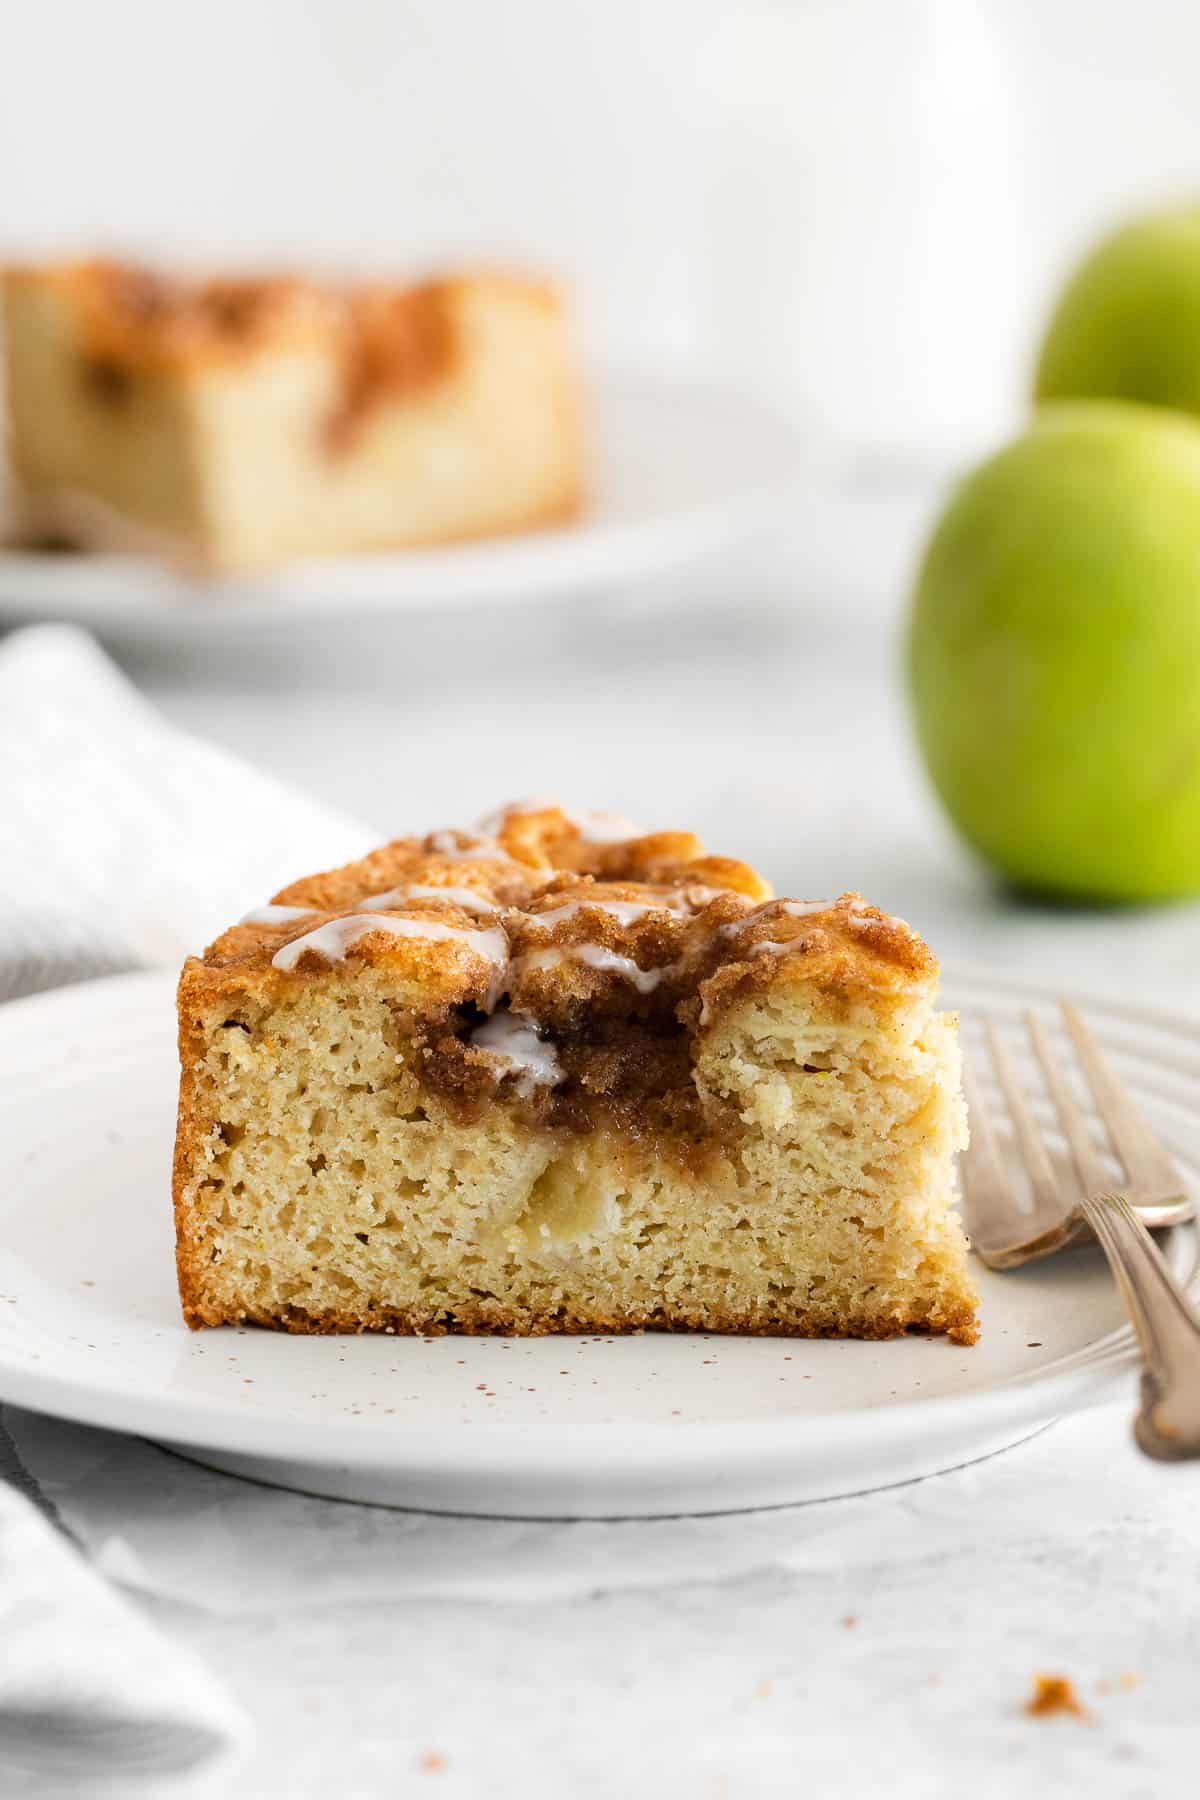 A side view of a slice of apple cake